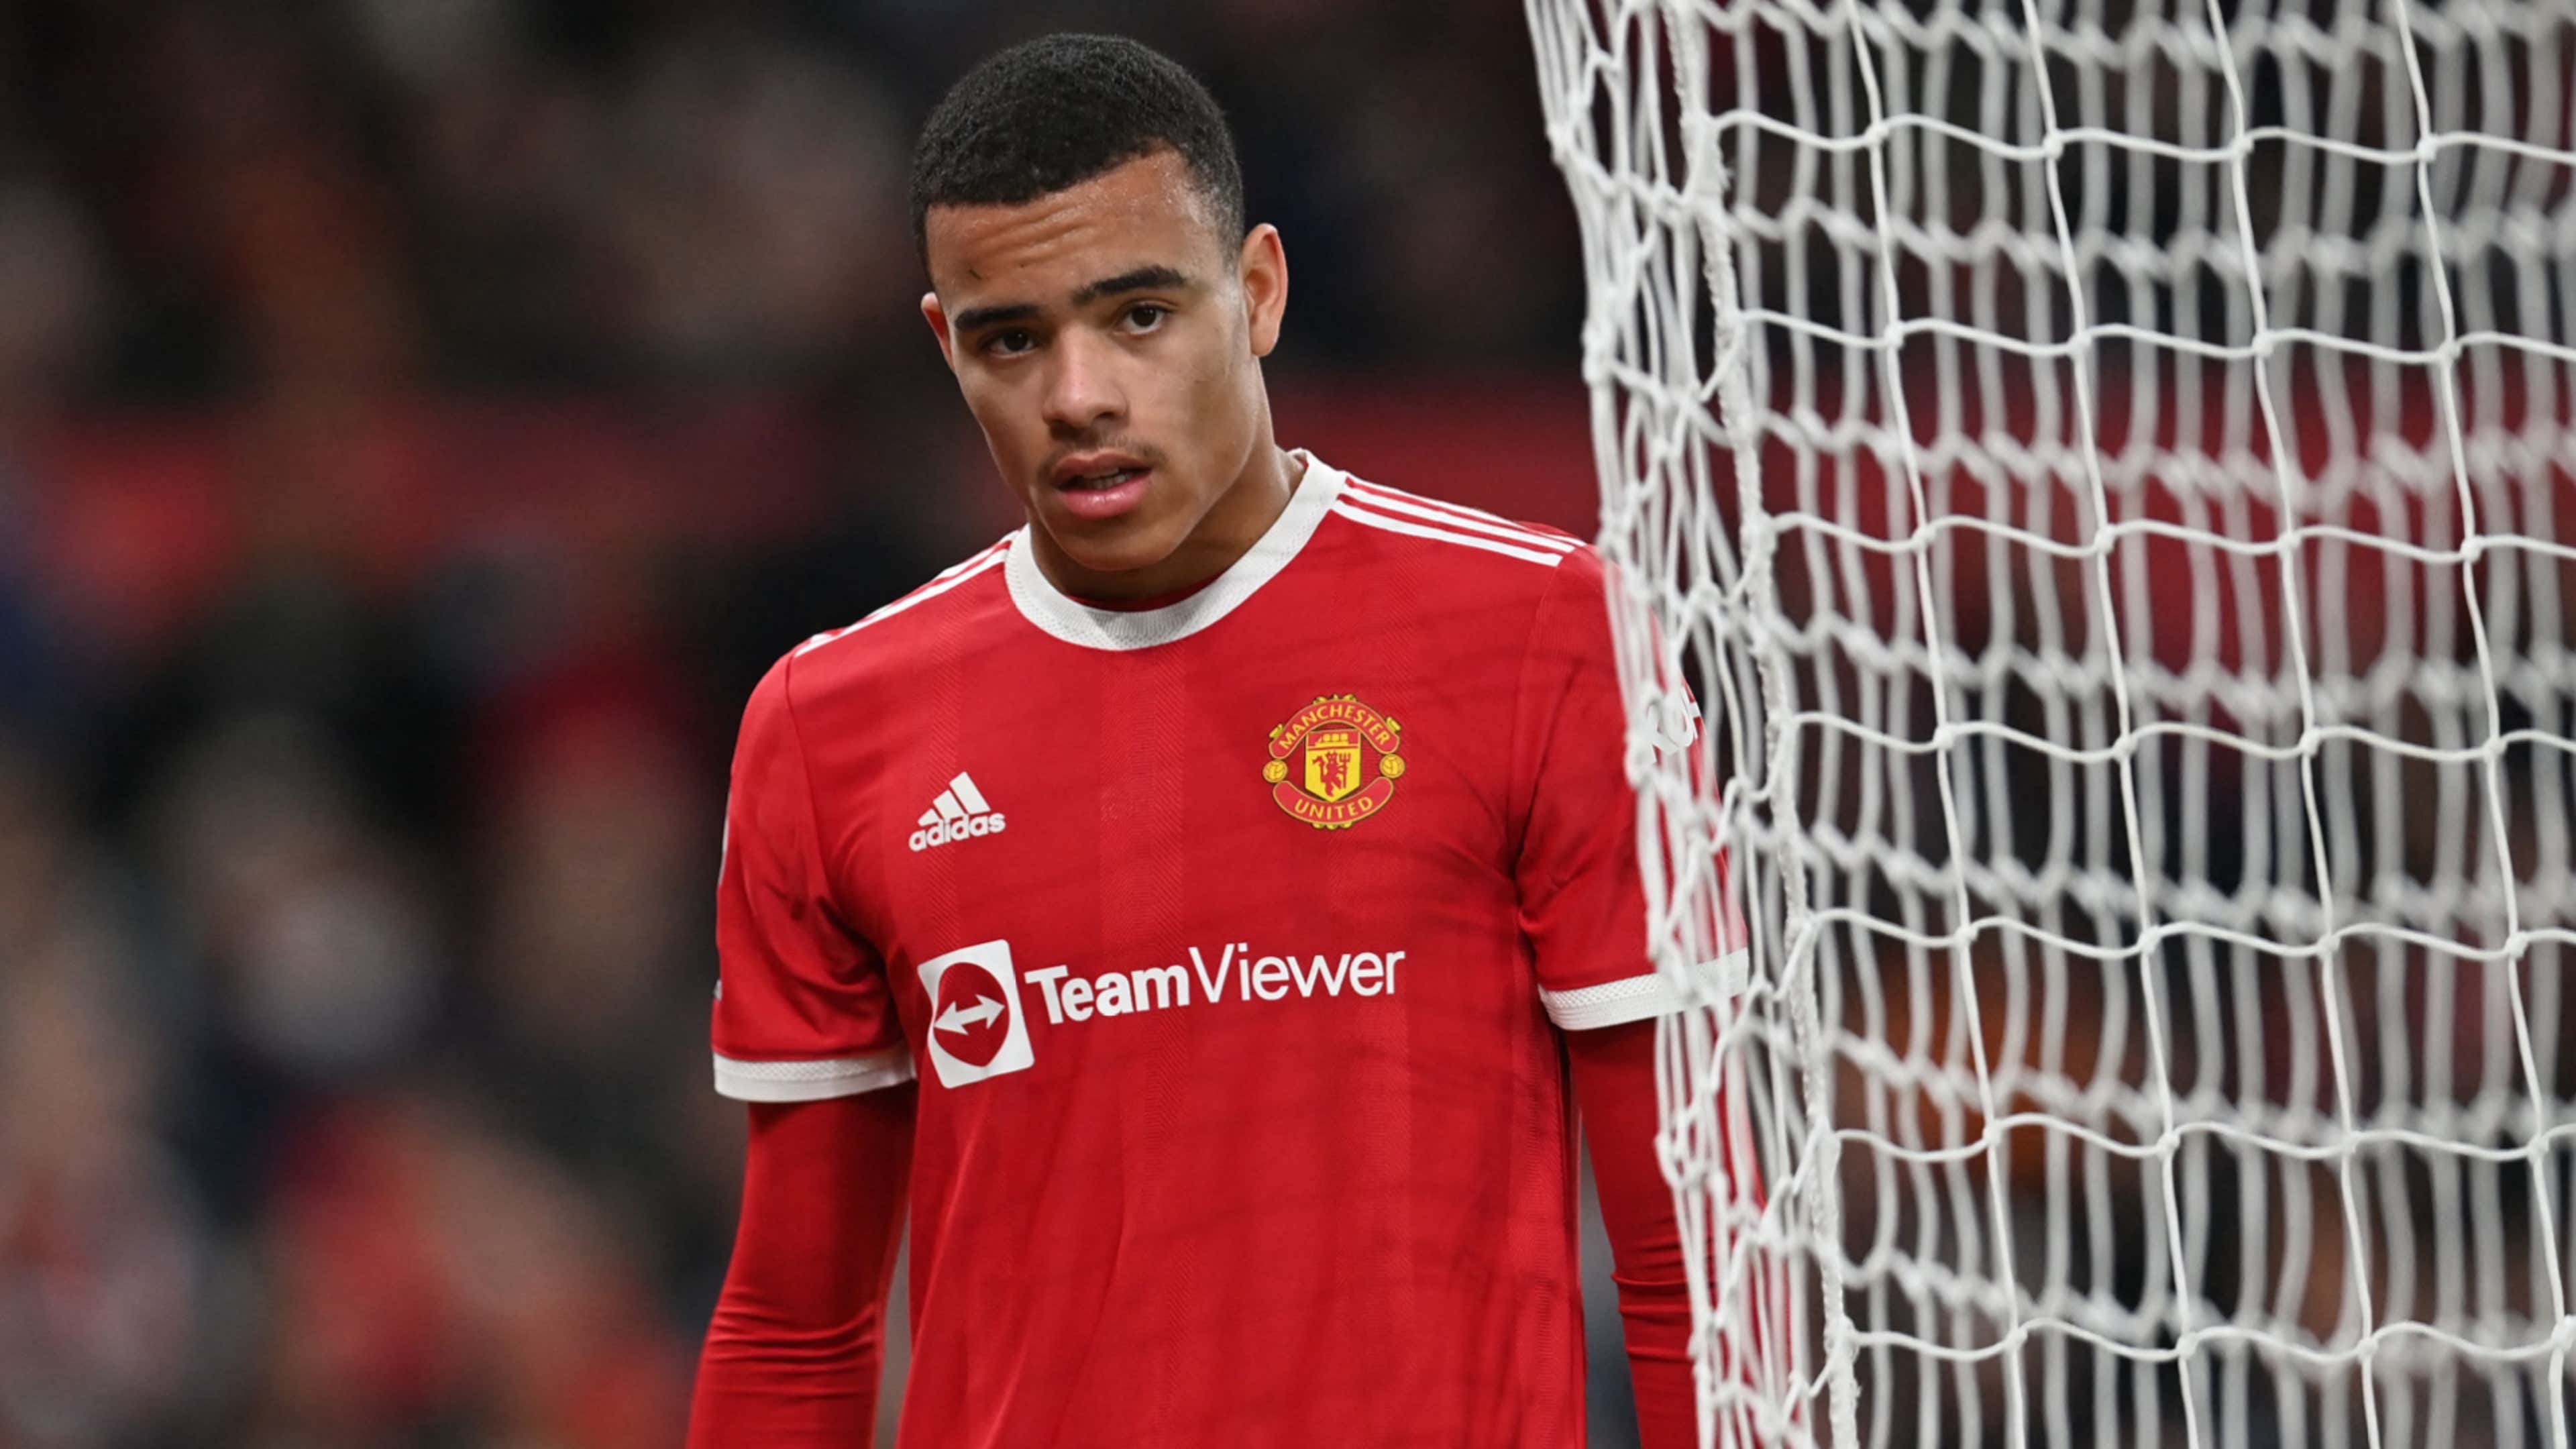 Manchester United set to announce decision on Mason Greenwood's future  ahead of Red Devils' first game of the season against Wolves | Goal.com